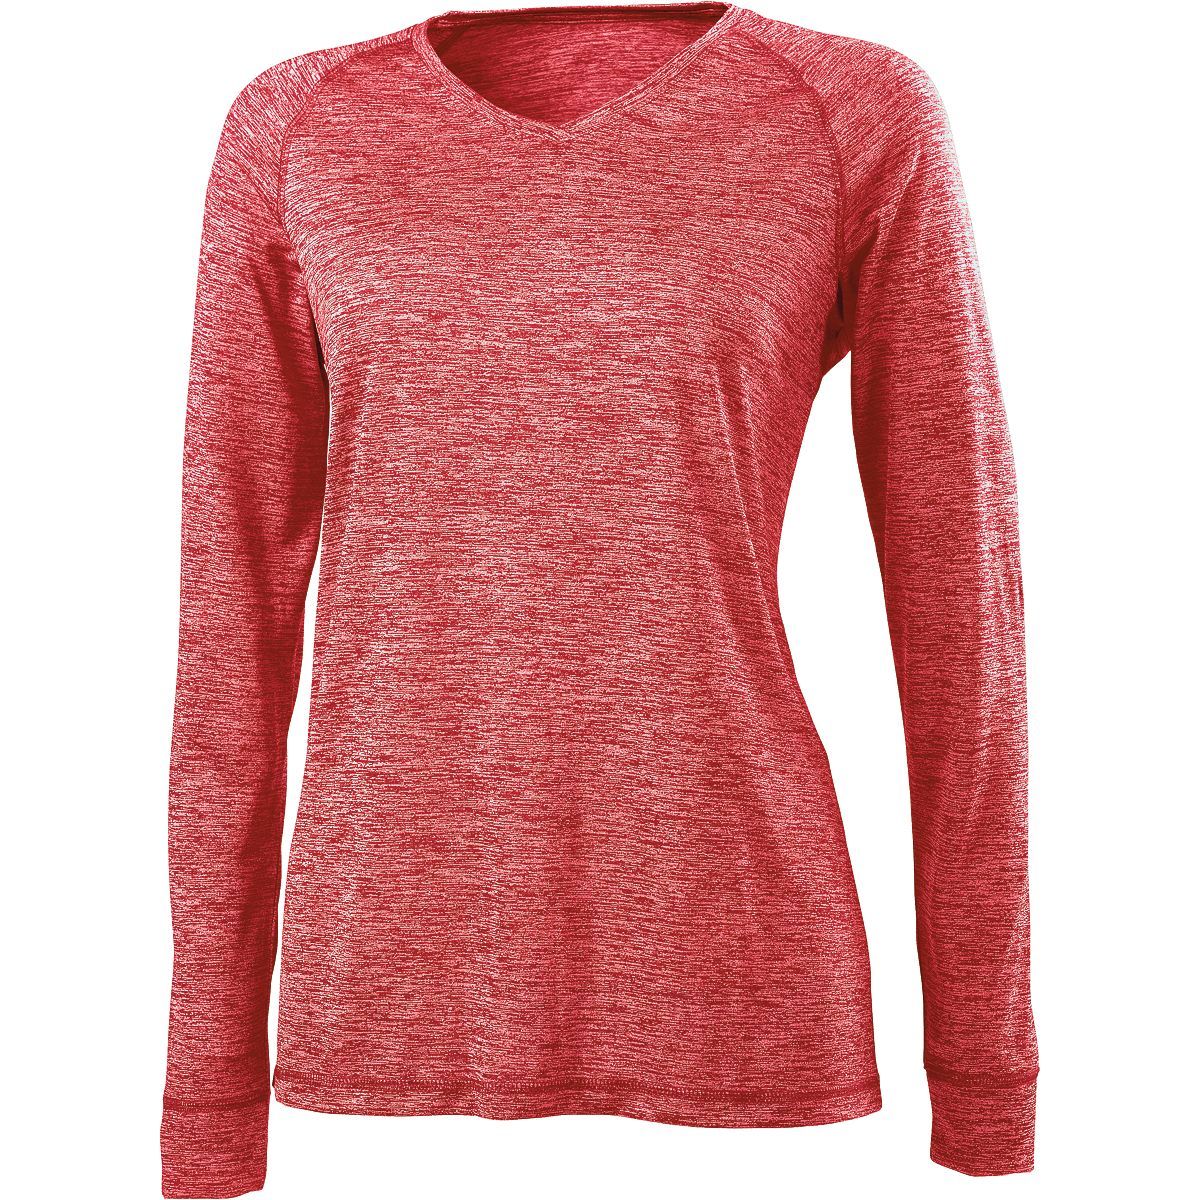 Holloway Ladies Electrify 2.0 V-Neck Long Sleeve Shirt in Scarlet Heather  -Part of the Ladies, Holloway, Shirts product lines at KanaleyCreations.com